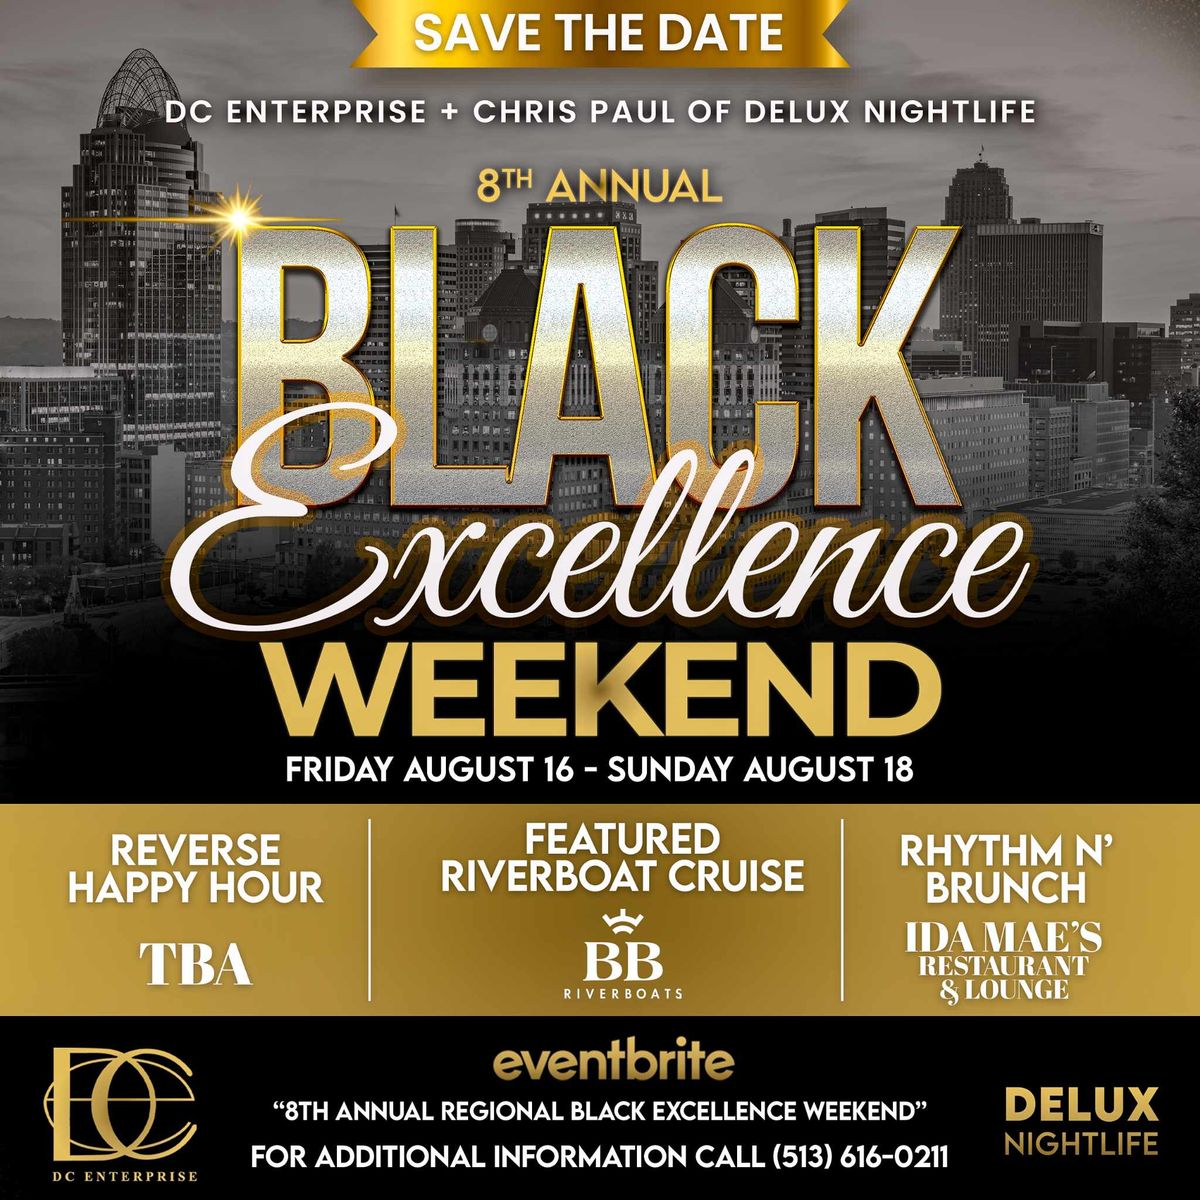 8th Annual Regional Black Excellence Weekend